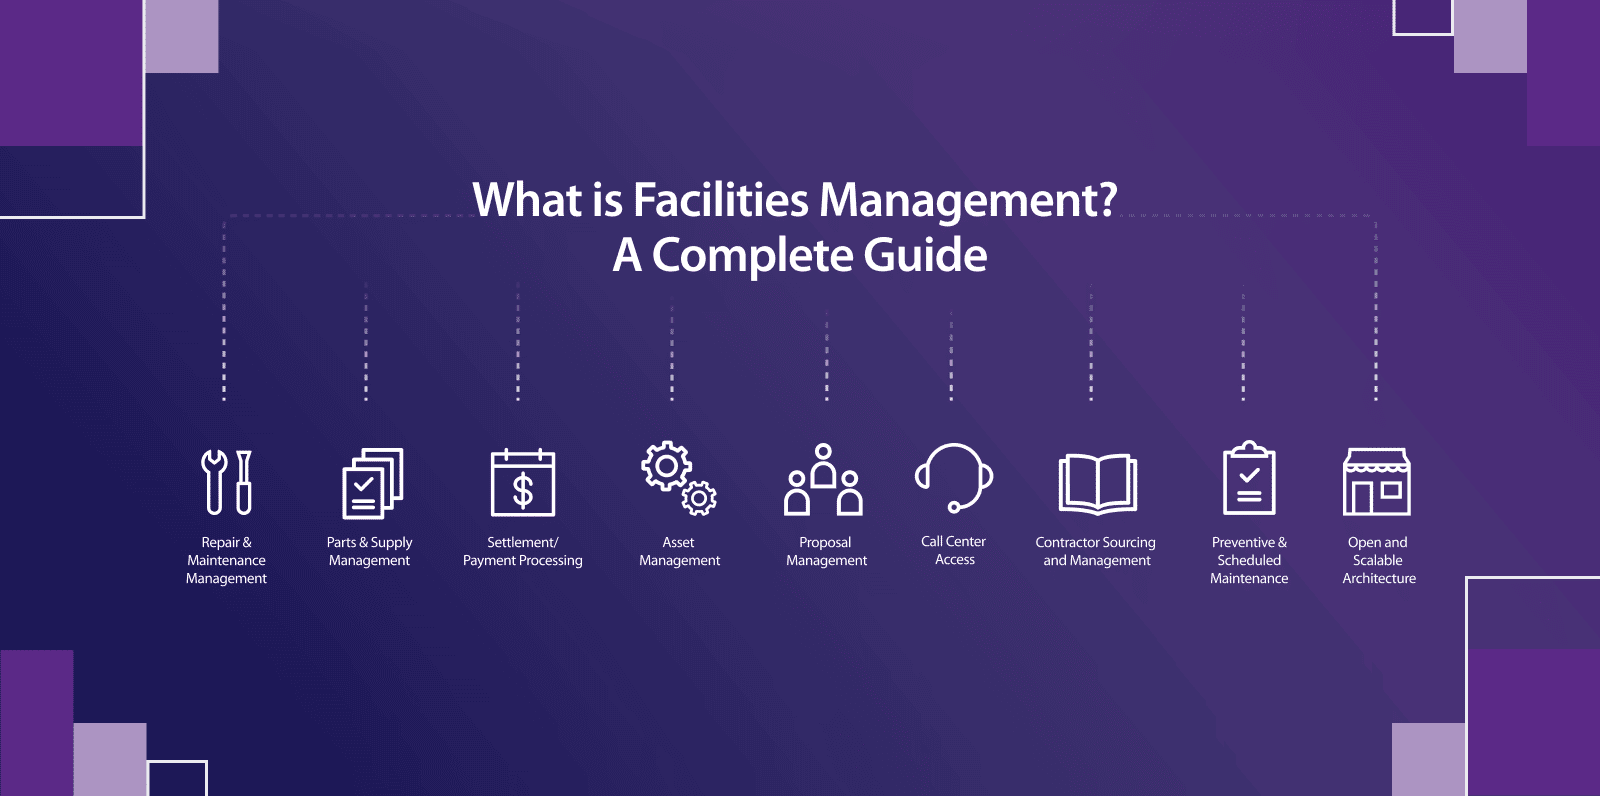 Facility Management Software